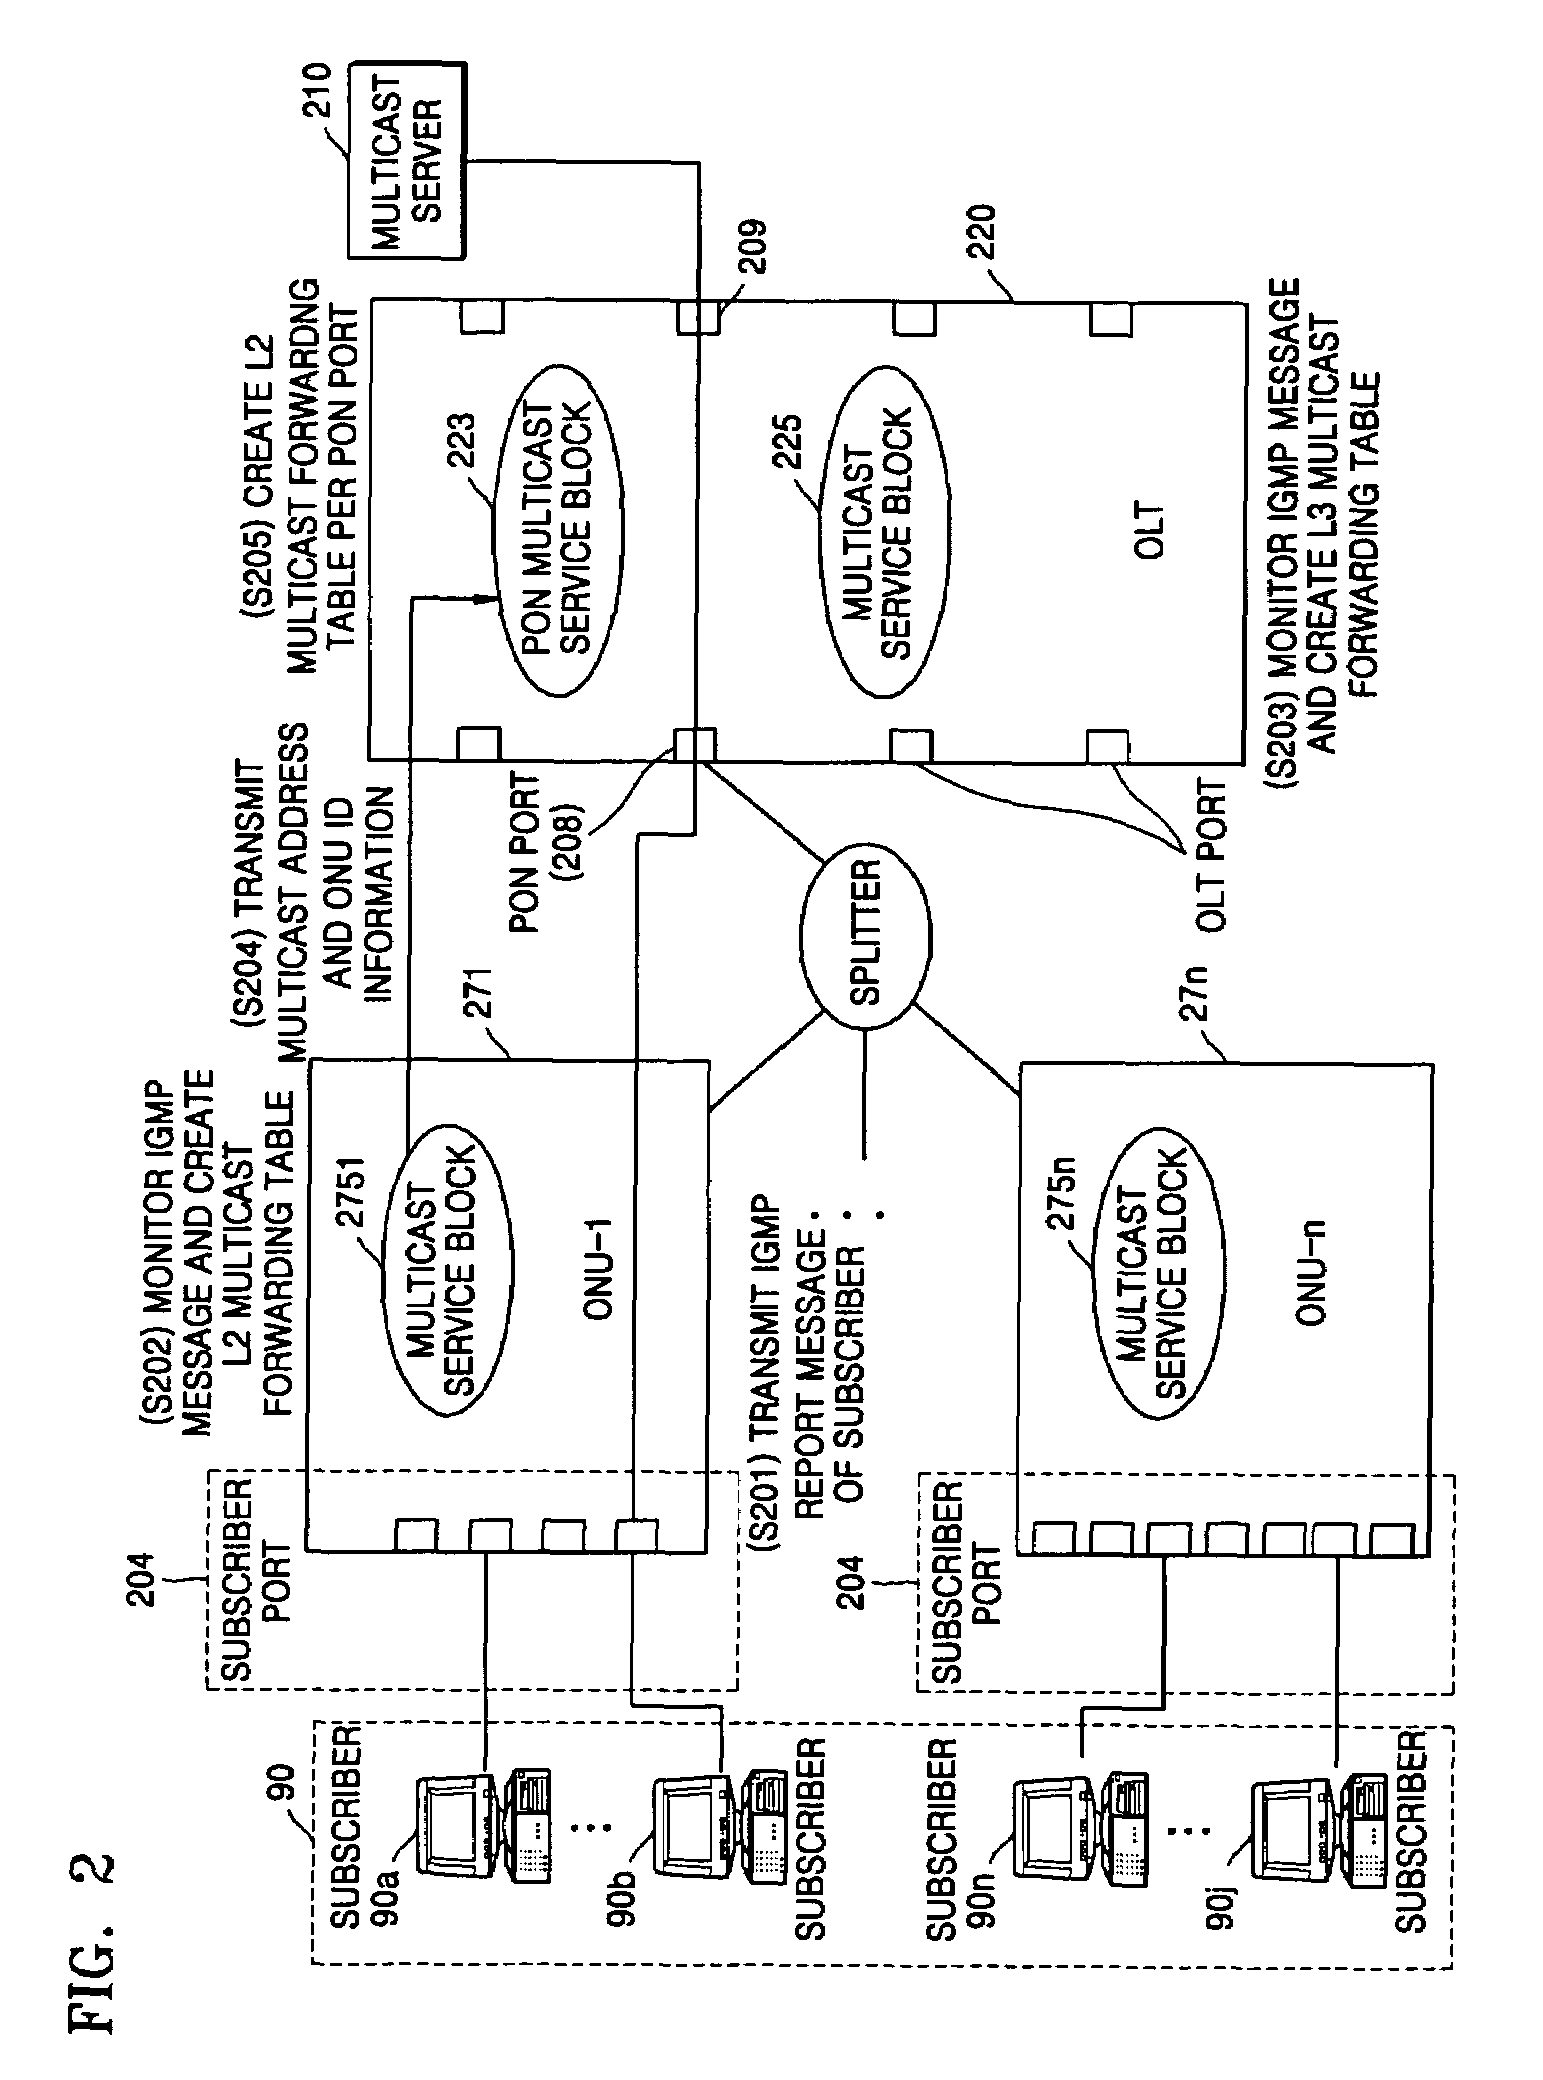 Method for supporting multicast service in ethernet passive optical network system